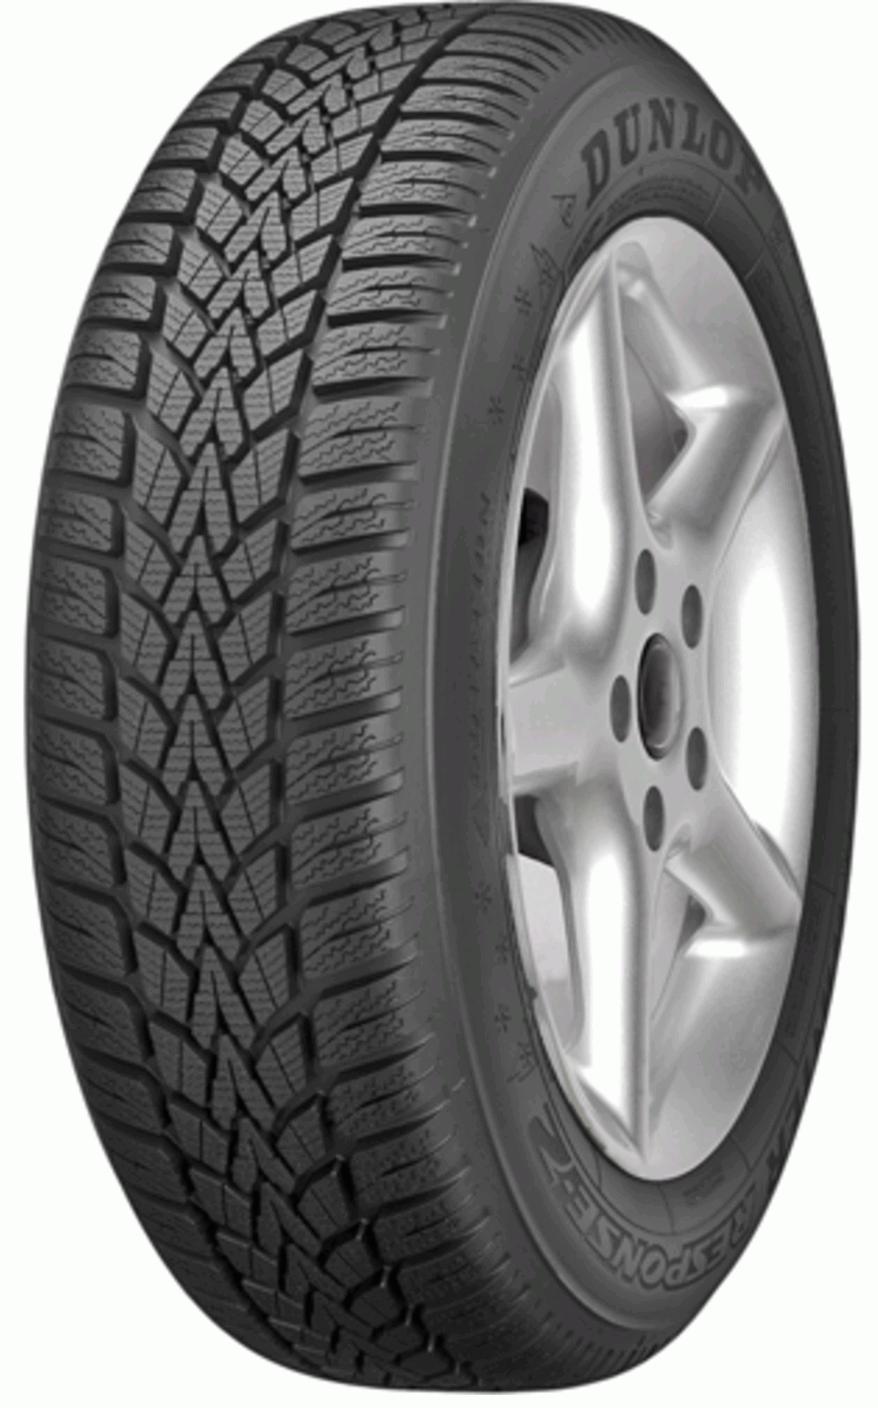 Thumb Dunlop Gomme Nuove Dunlop 155/65 R14 75T WINTER RESPONSE-2 M+S pneumatici nuovi Invernale_0